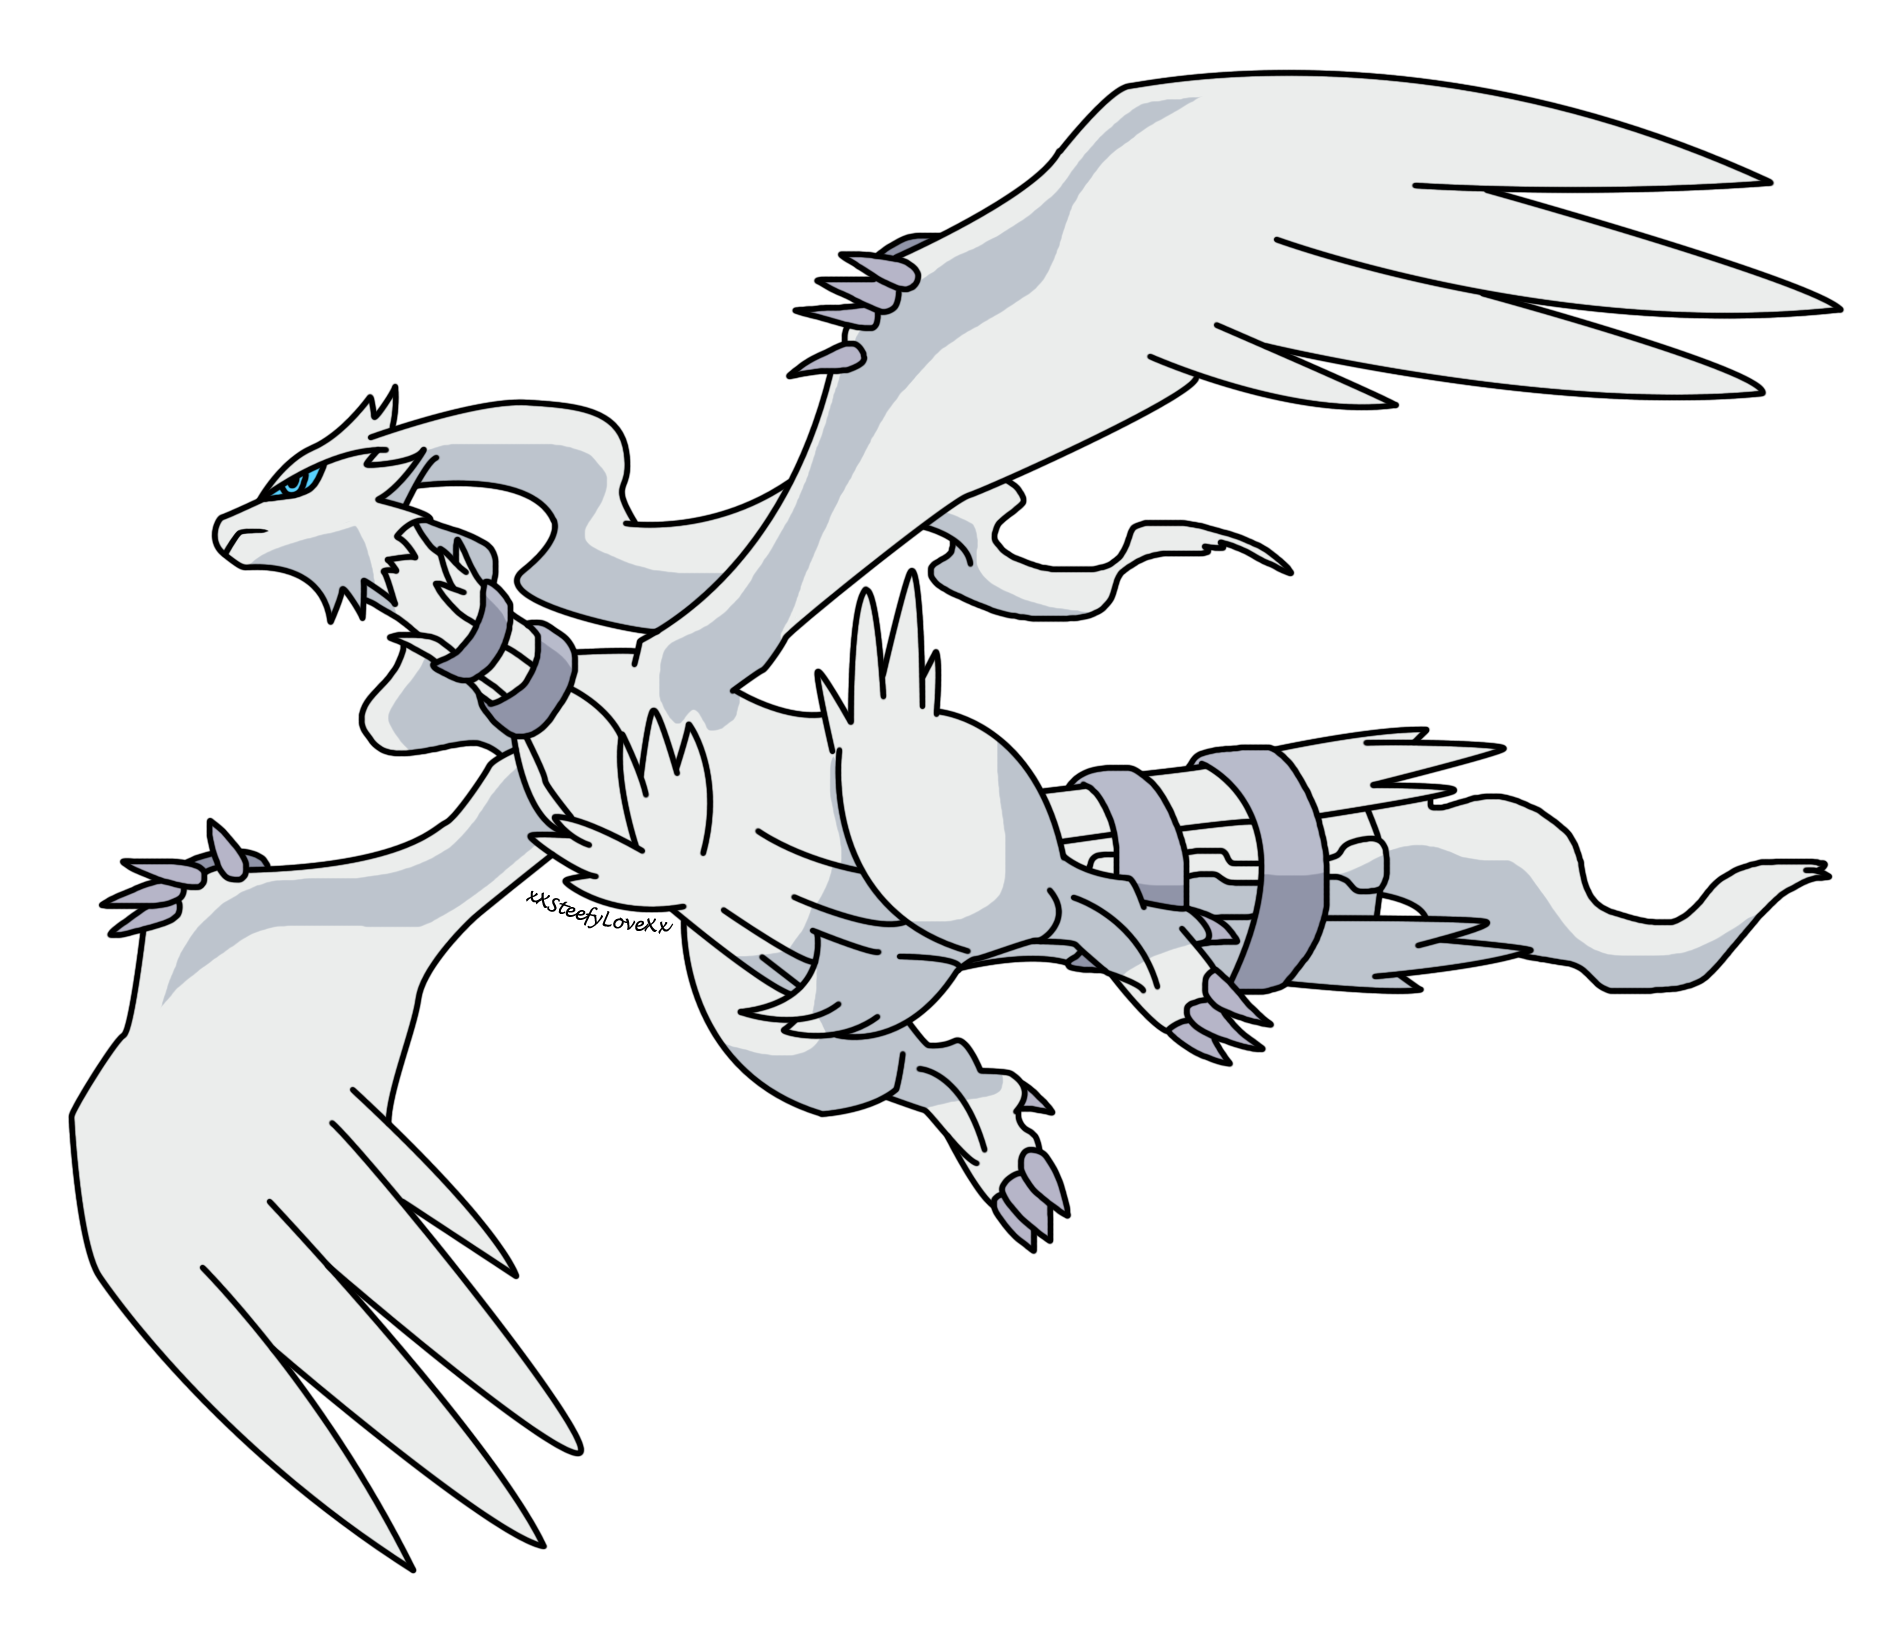 [Image: reshiram__flying_by_xxsteefylovexx-d4rr4nu.png]